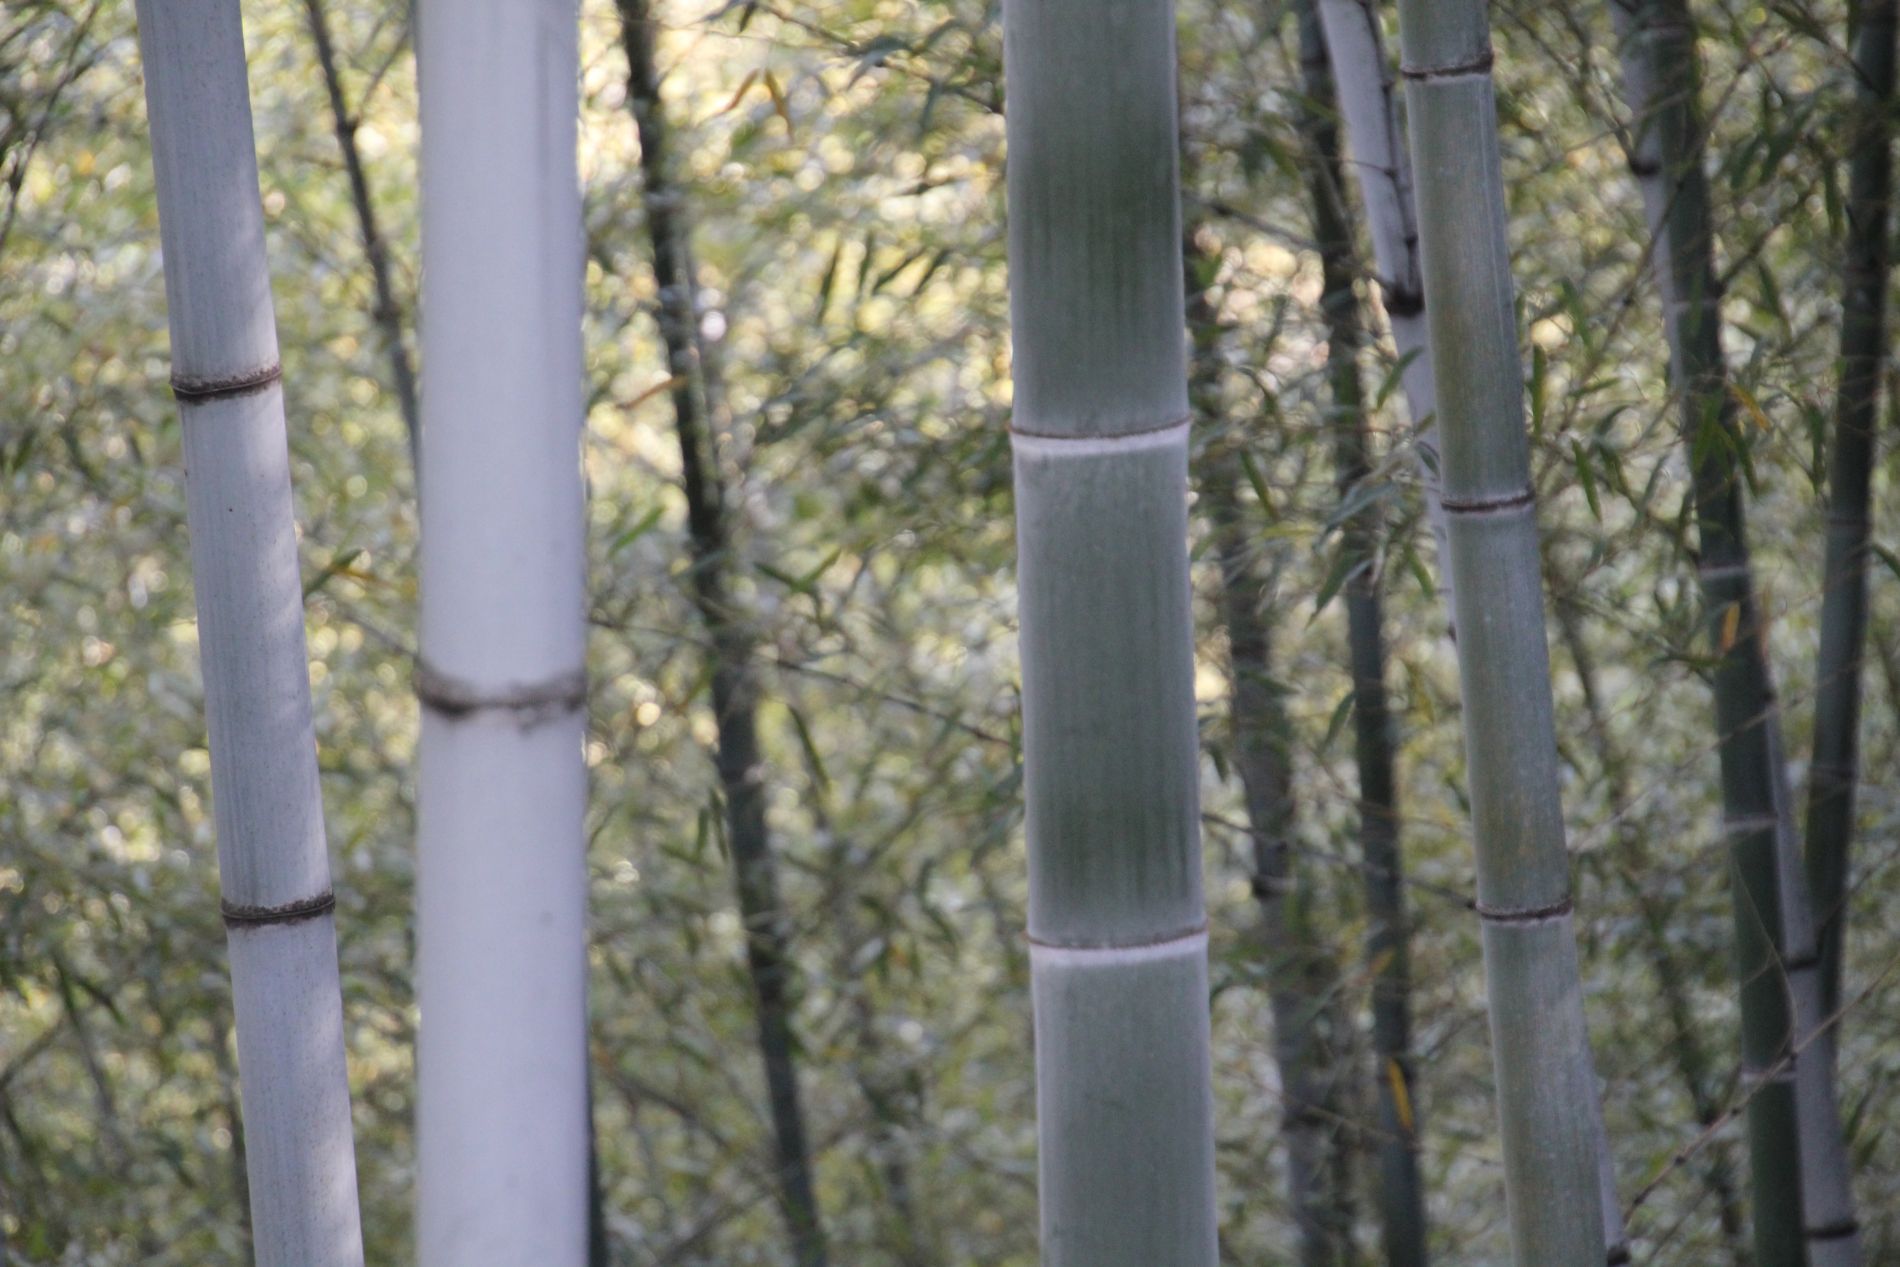 Green trees abound in the Mukeng bamboo forest.